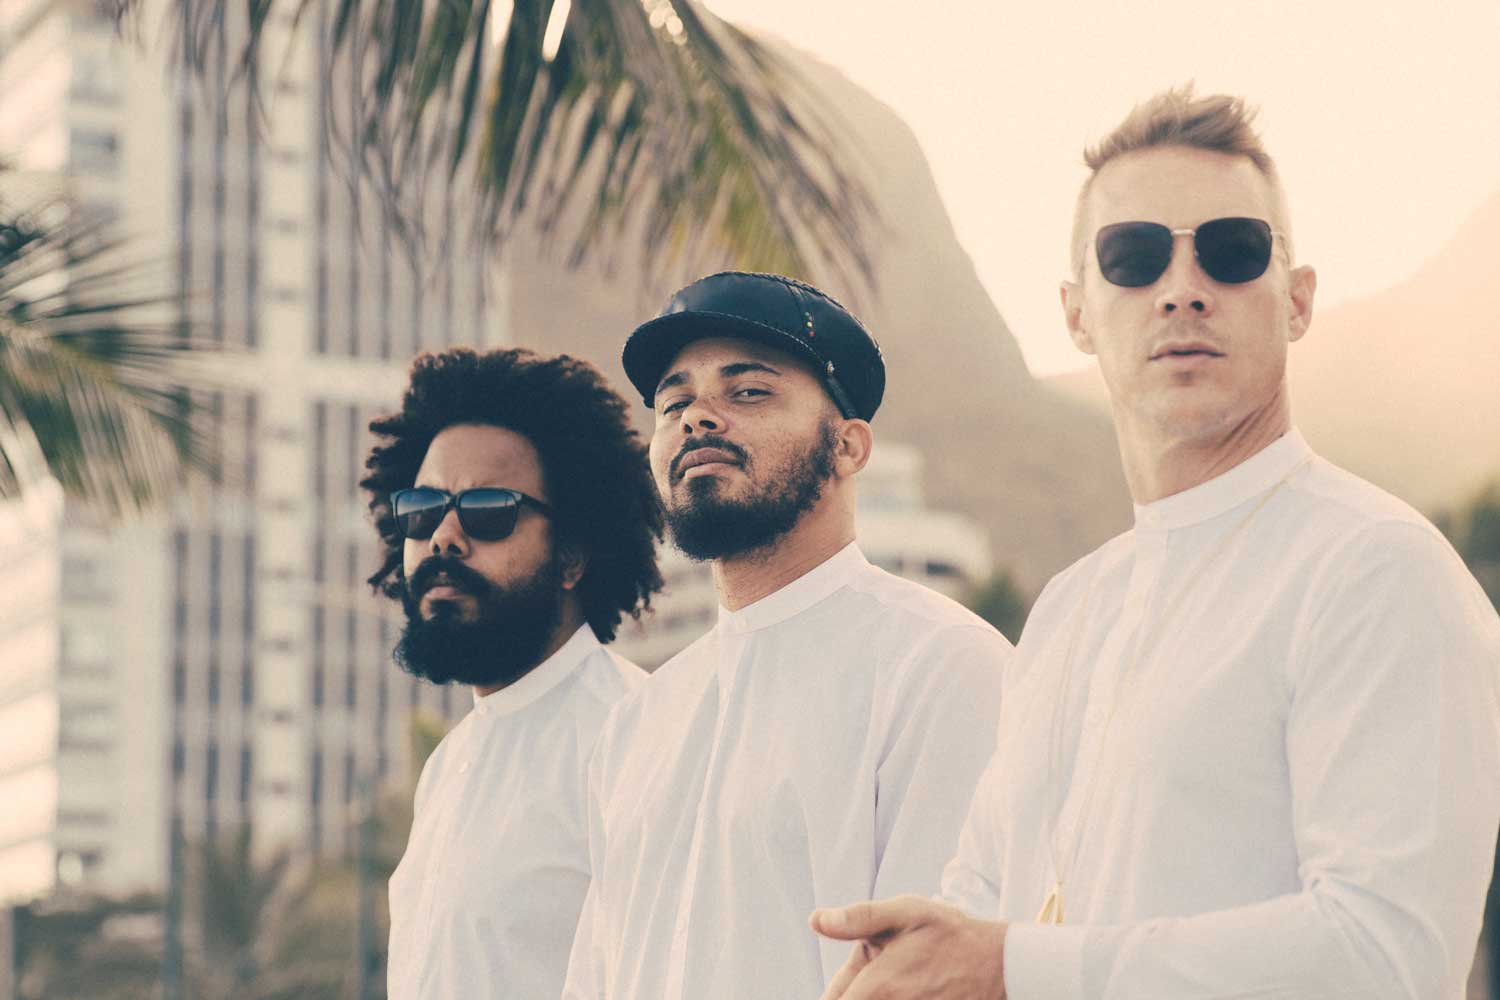 Amazing Major Lazer Pictures & Backgrounds